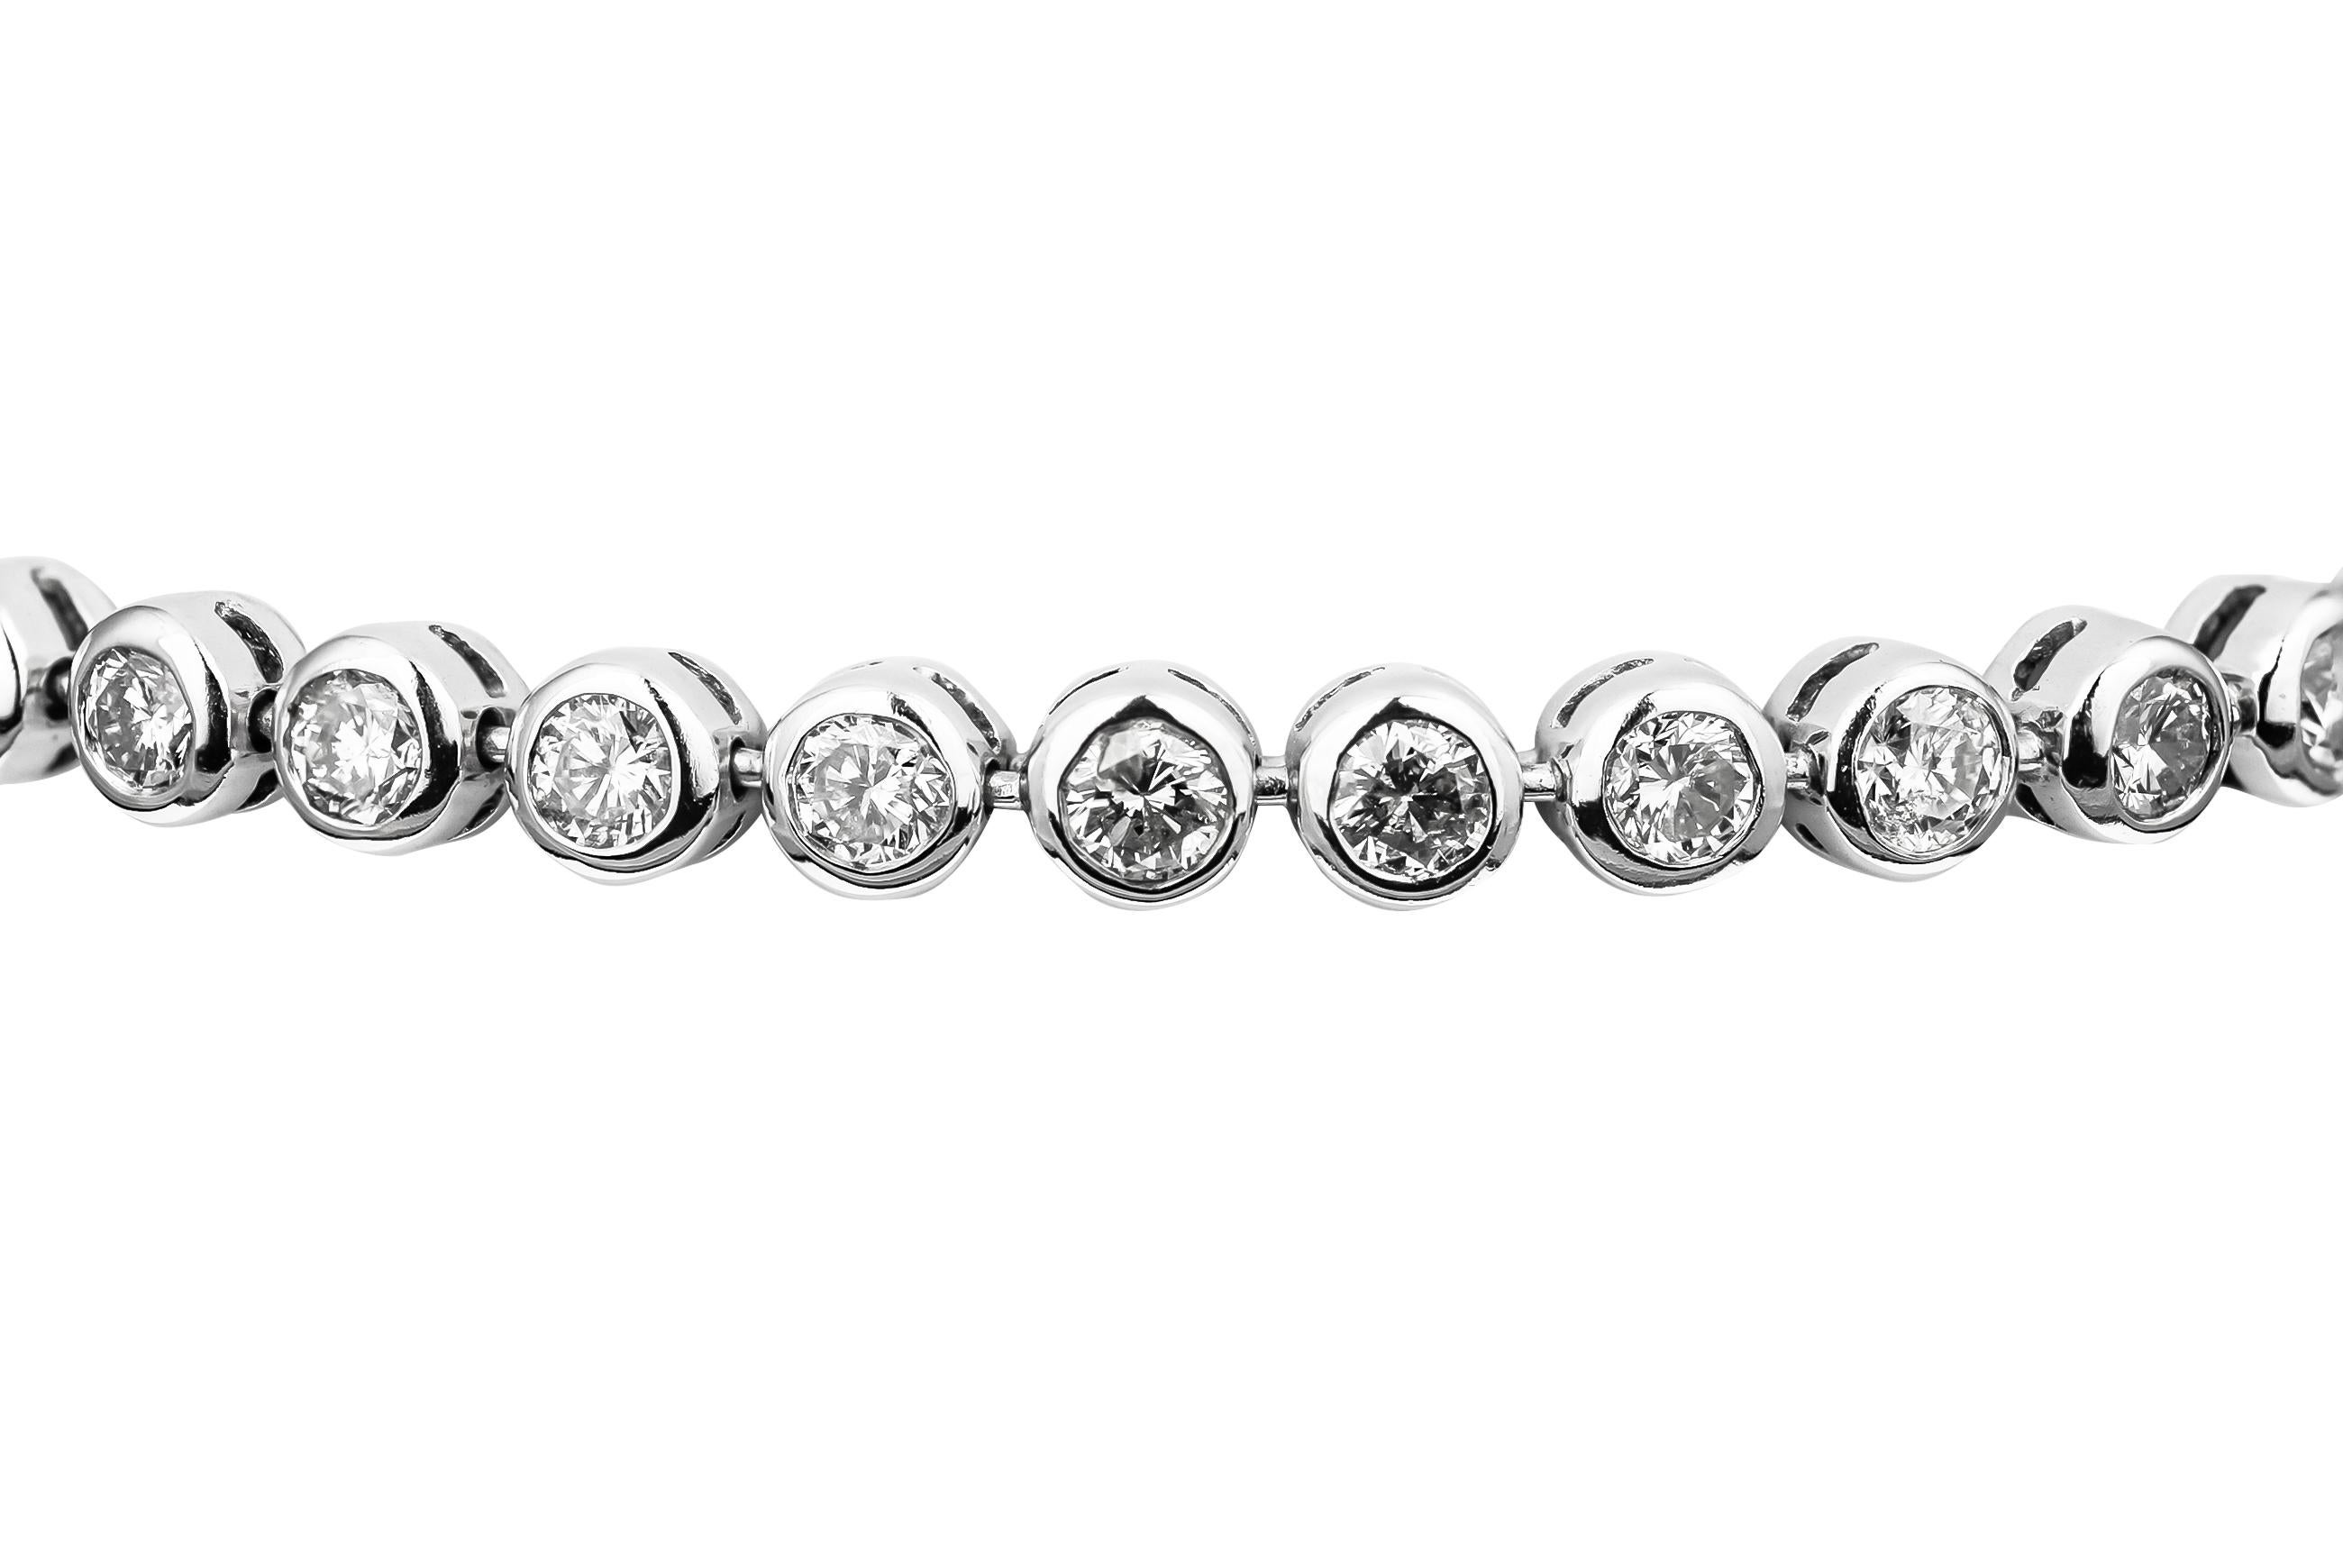 18ct white gold tennis braclet featuring 34 round brilliant cut diamonds of H/I/J colour, pique clarity weighing a total of 3.40cts in  a smooth rubover setting.
With a safety clasp for security, the bracelet weighs a total of 12.6g.

A smooth and